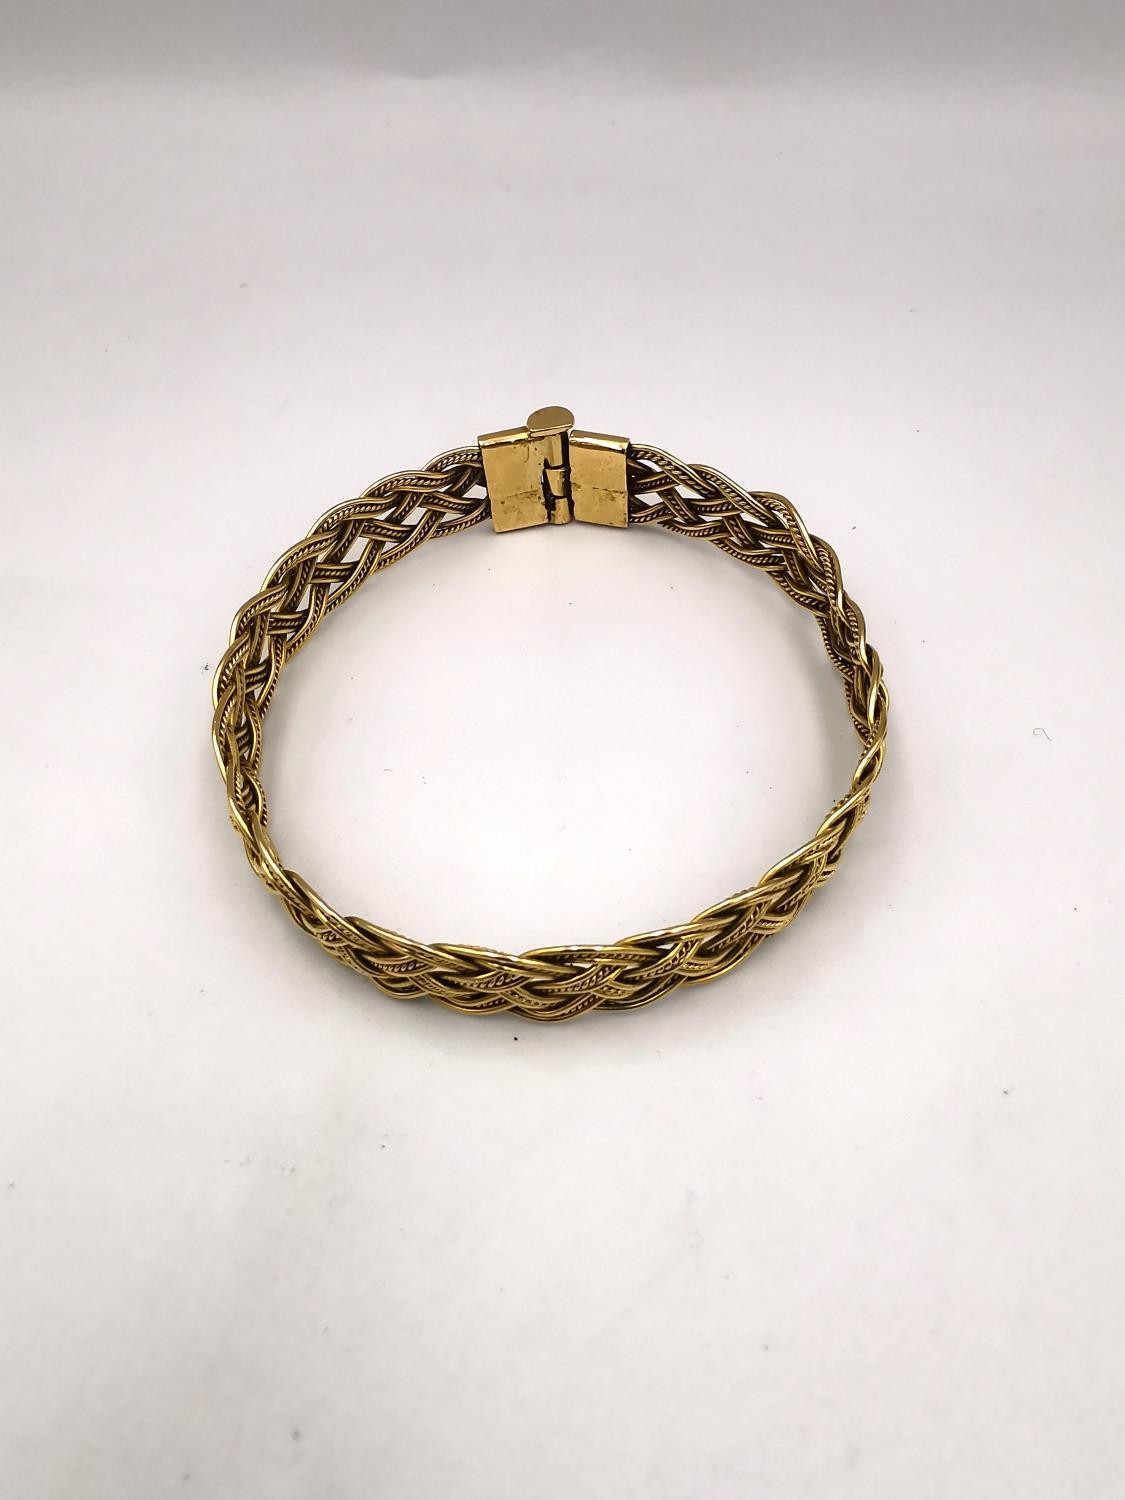 A woven gold plated wirework plaited bracelet with pin fastening. Diameter 6cm. Weight 18.62g. - Image 3 of 10